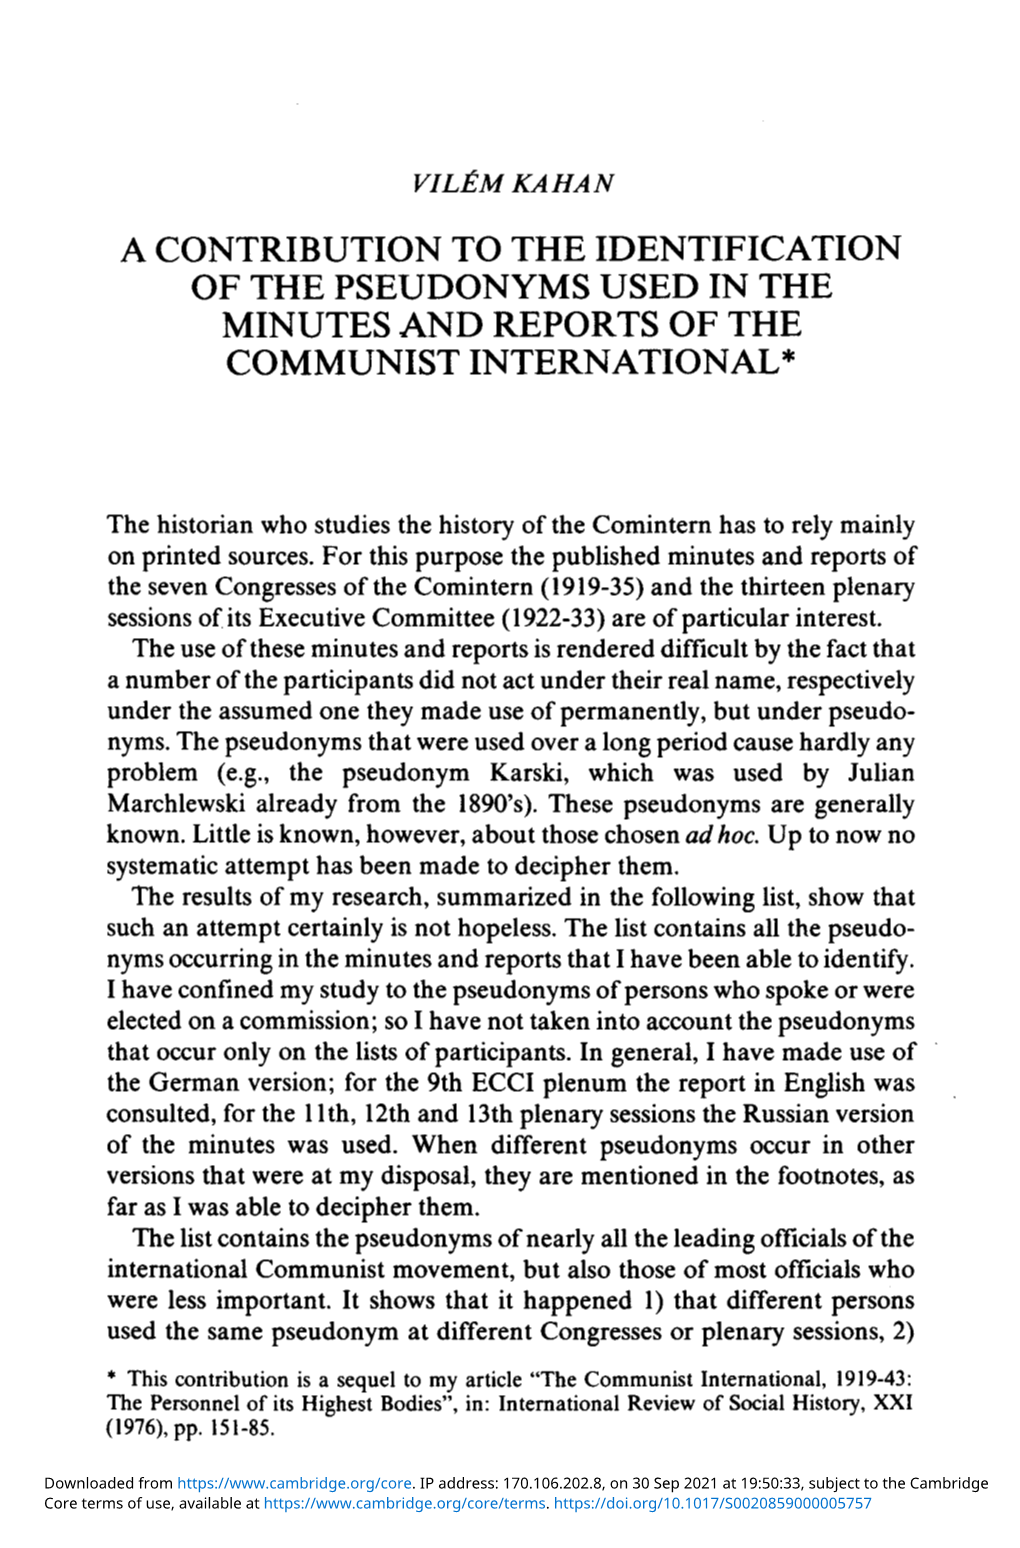 A Contribution to the Identification of the Pseudonyms Used in the Minutes and Reports of the Communist International*